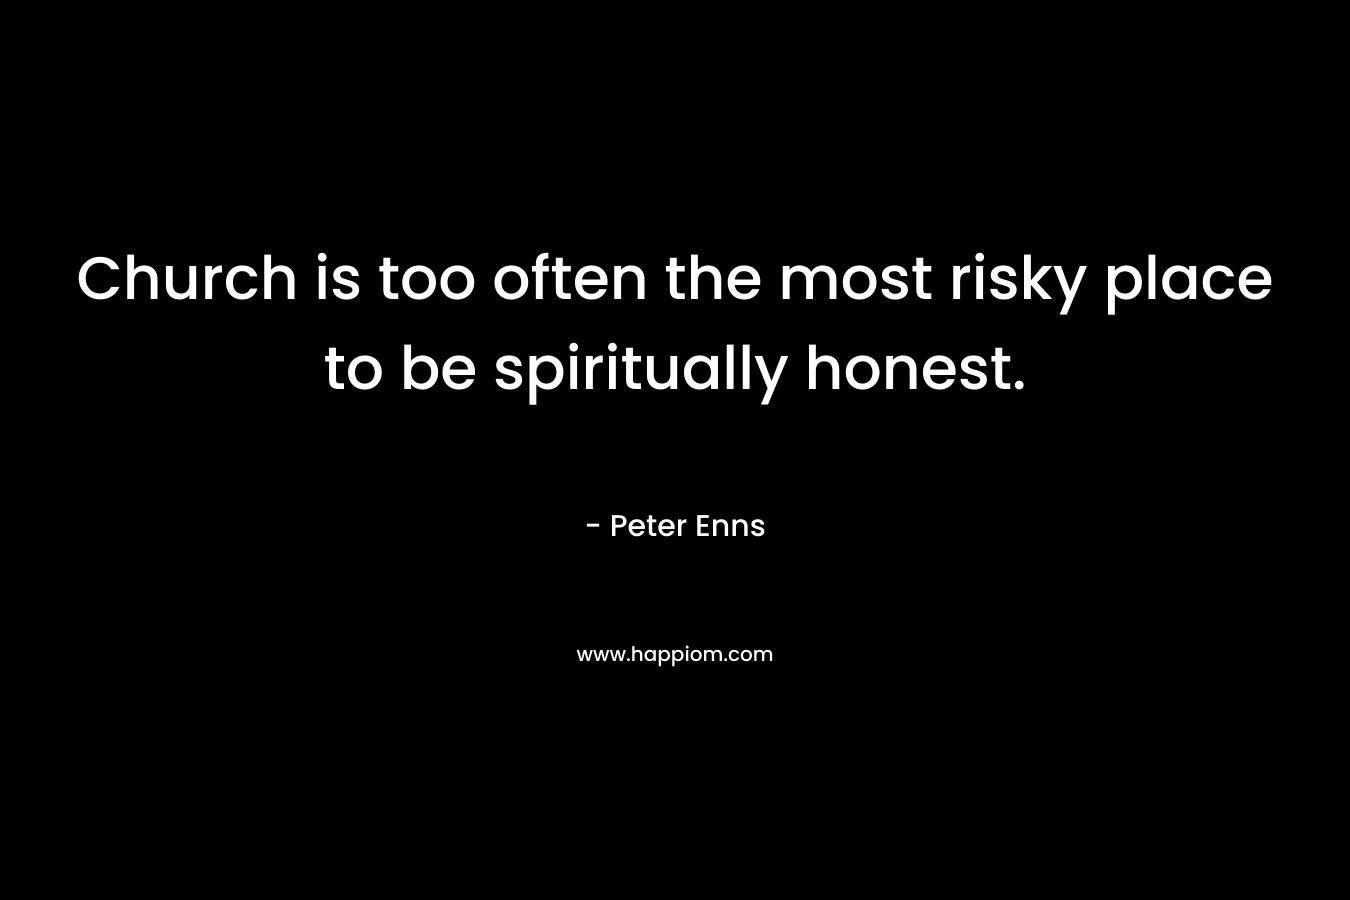 Church is too often the most risky place to be spiritually honest.